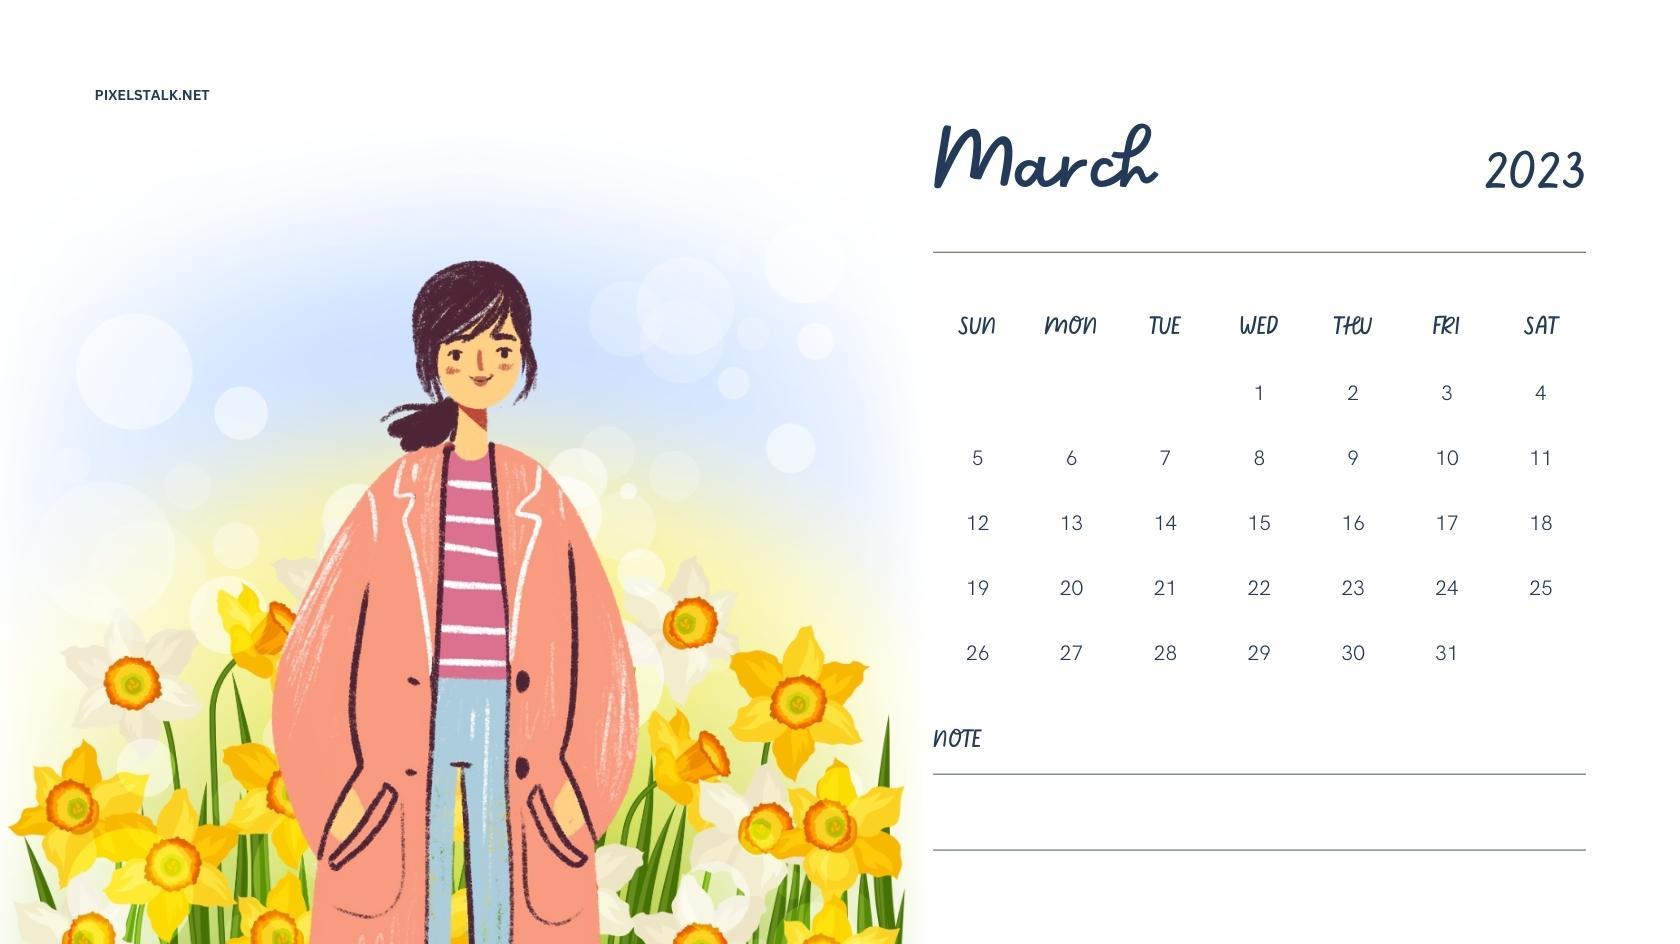 March Calendar Wallpapers HD Free Download